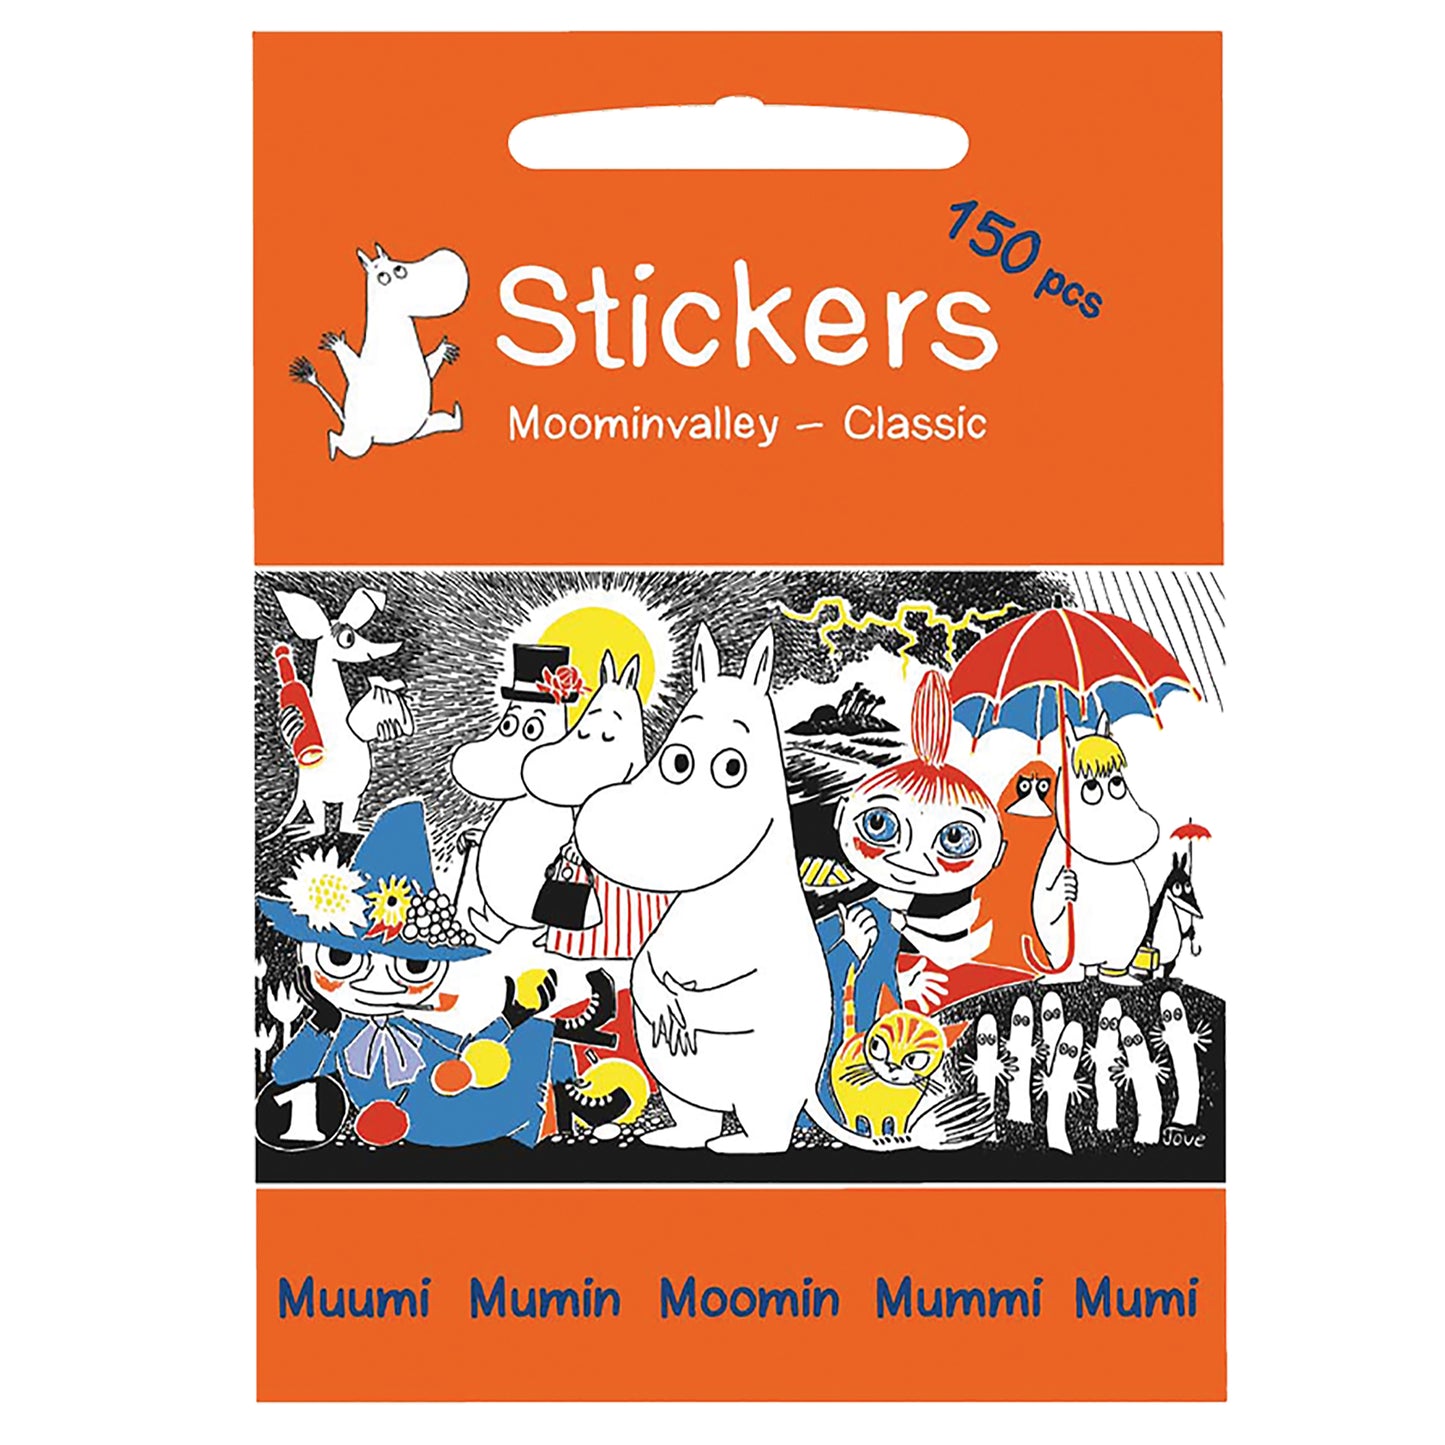 Moomin Valley Stickers